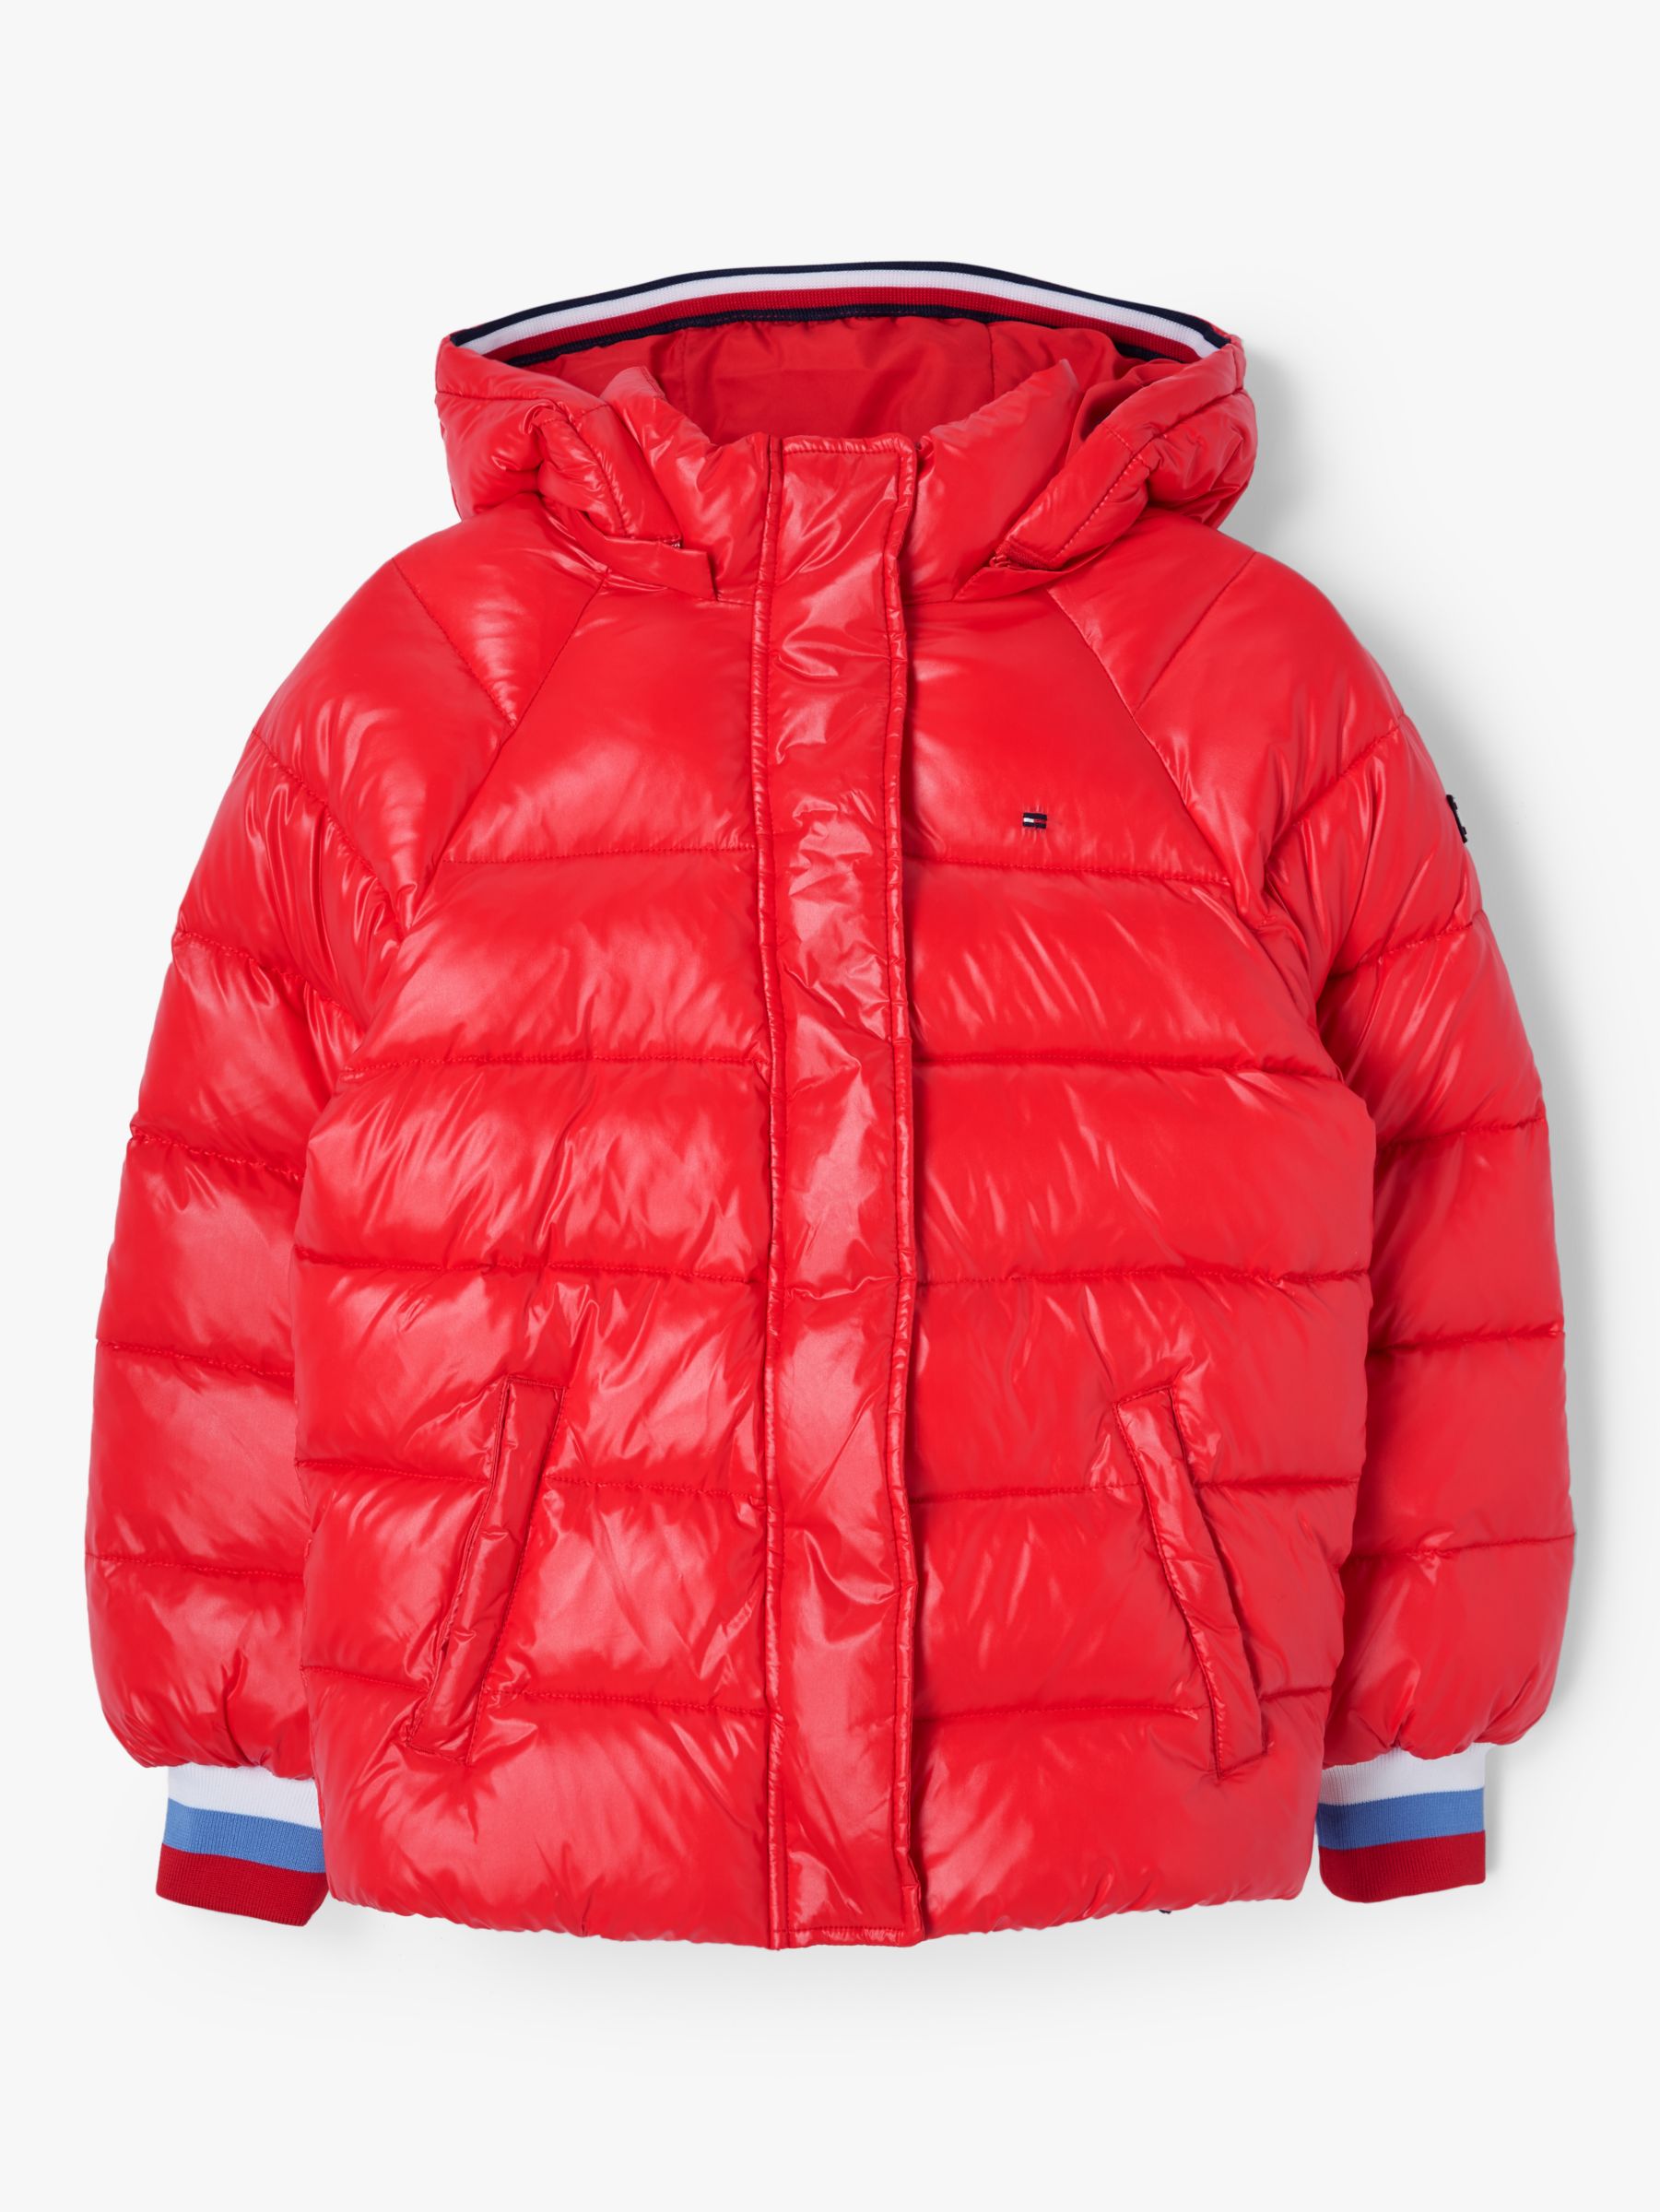 Tommy Hilfiger Girls' High Shine Puffer Coat, Red at John Lewis & Partners